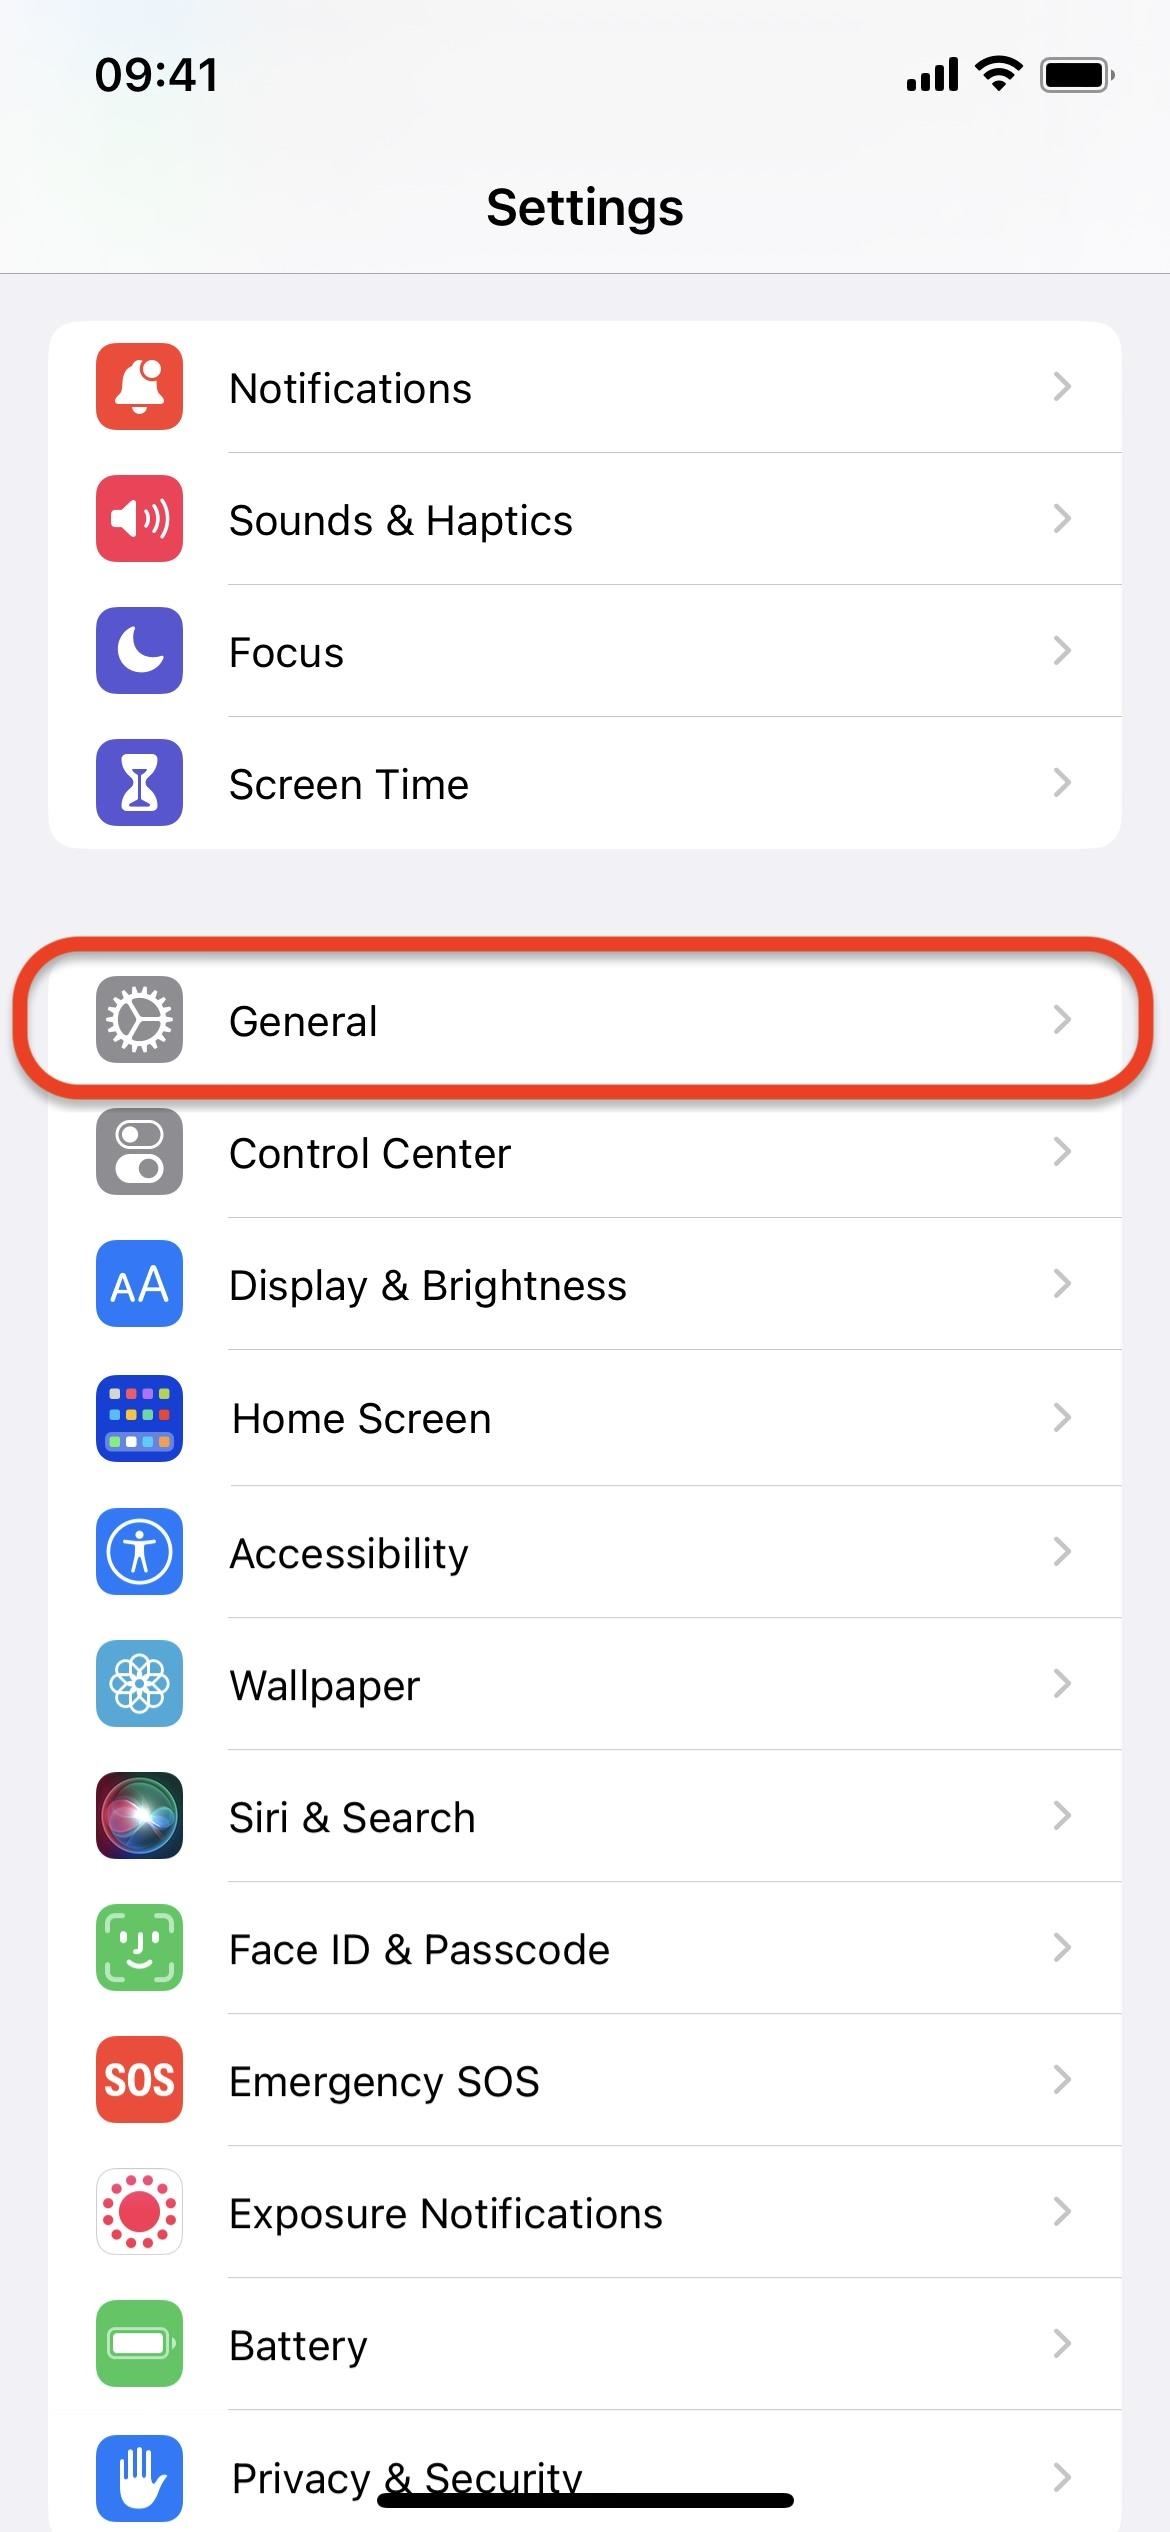 Seamlessly Transfer a FaceTime Call to Your iPhone, iPad, or Mac Without Disconnecting It